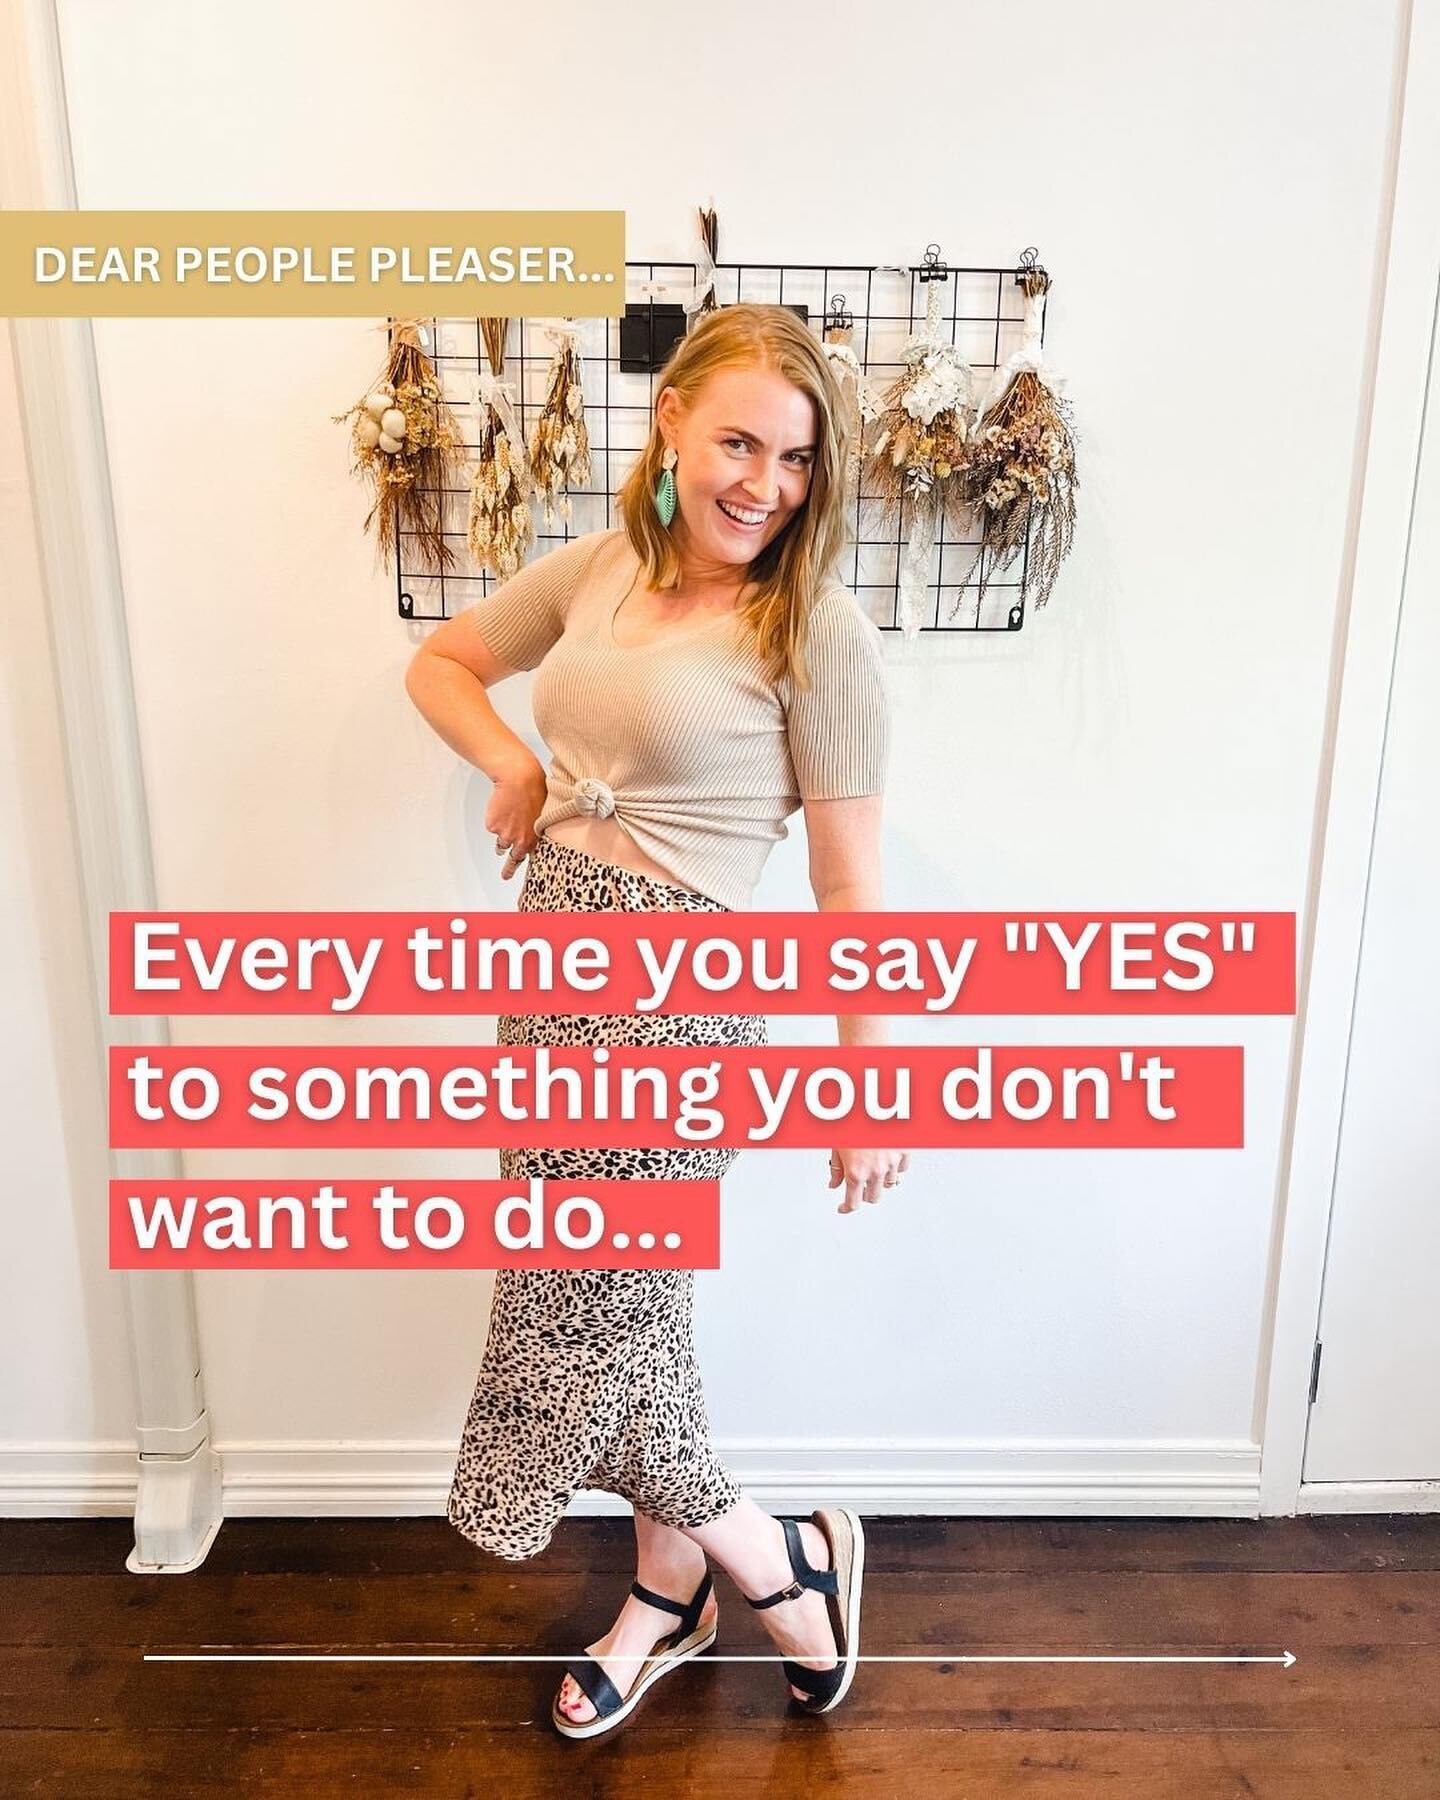 Dear people pleaser, you are constantly saying &ldquo;no&rdquo; to your time, your values, your memories with friends and family, and your happiness.

Every time you say &ldquo;yes&rdquo; to something you don&rsquo;t want to do you are equally saying